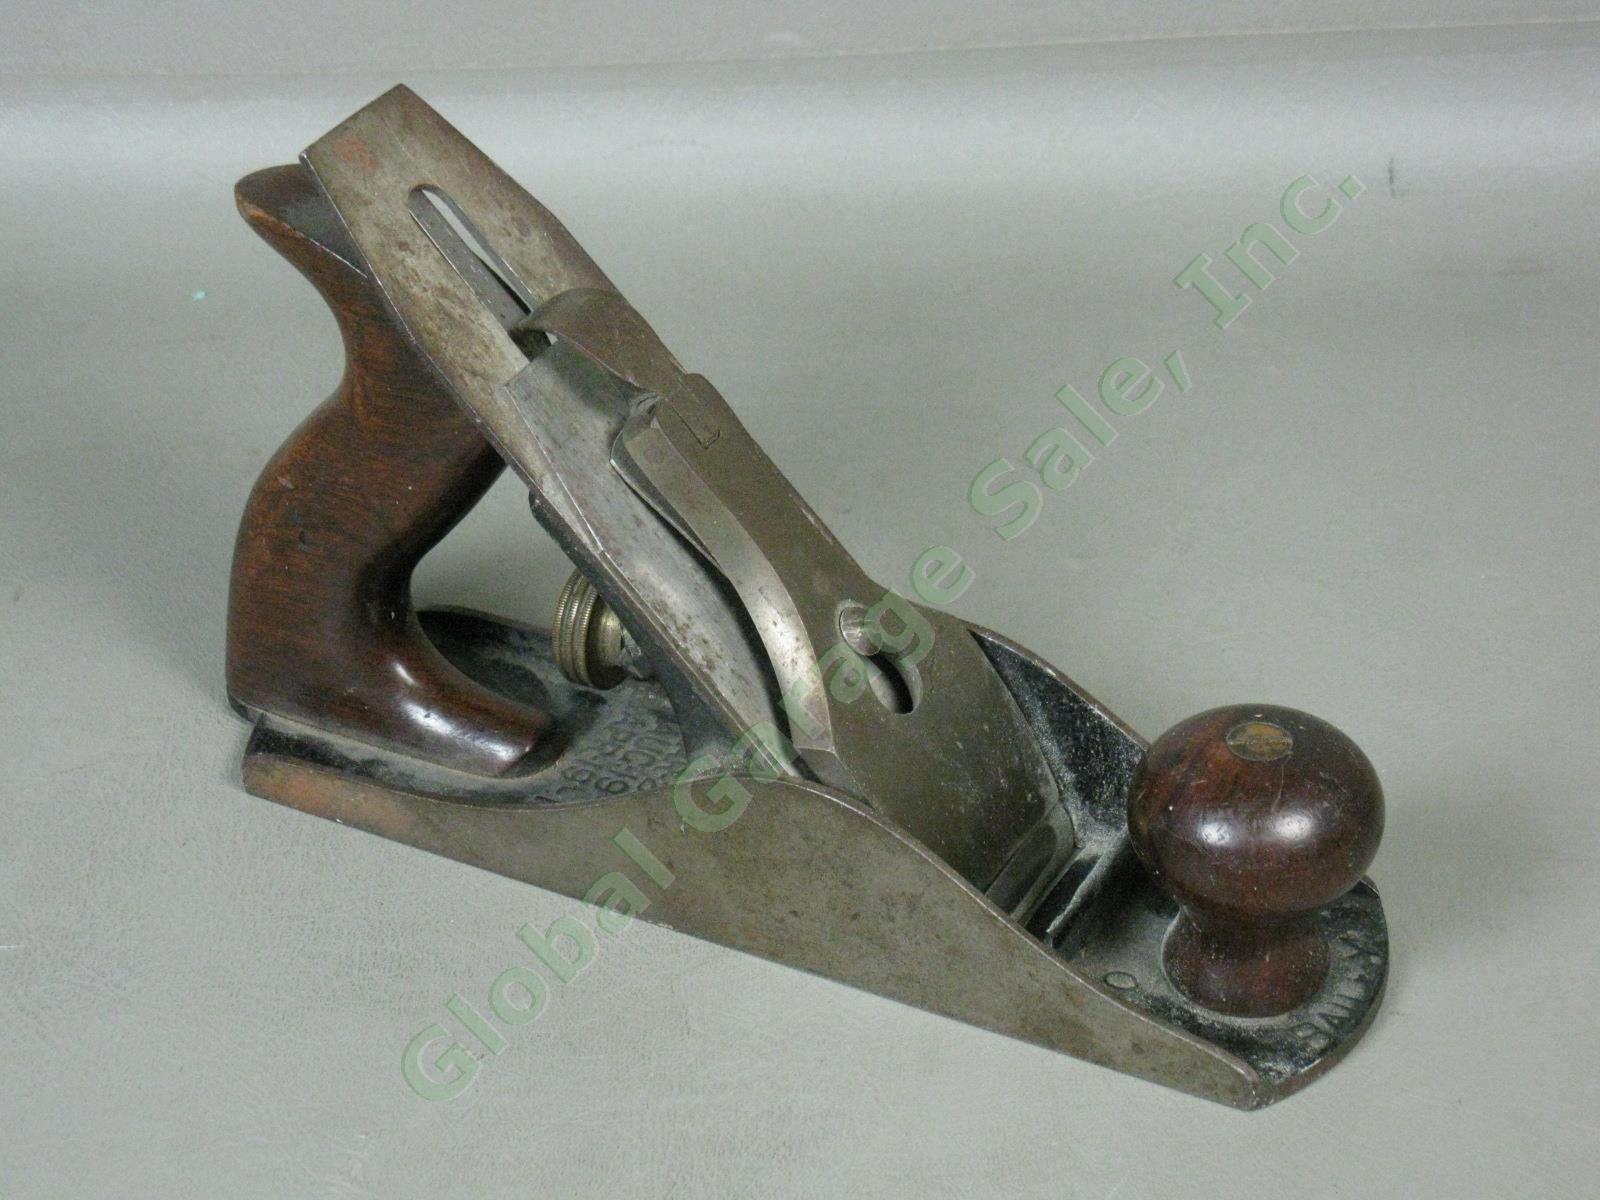 Vintage Stanley Bailey No 4 Smooth Bottom Carpentry Wood Plane Pat 4/19/1910 NR! 1